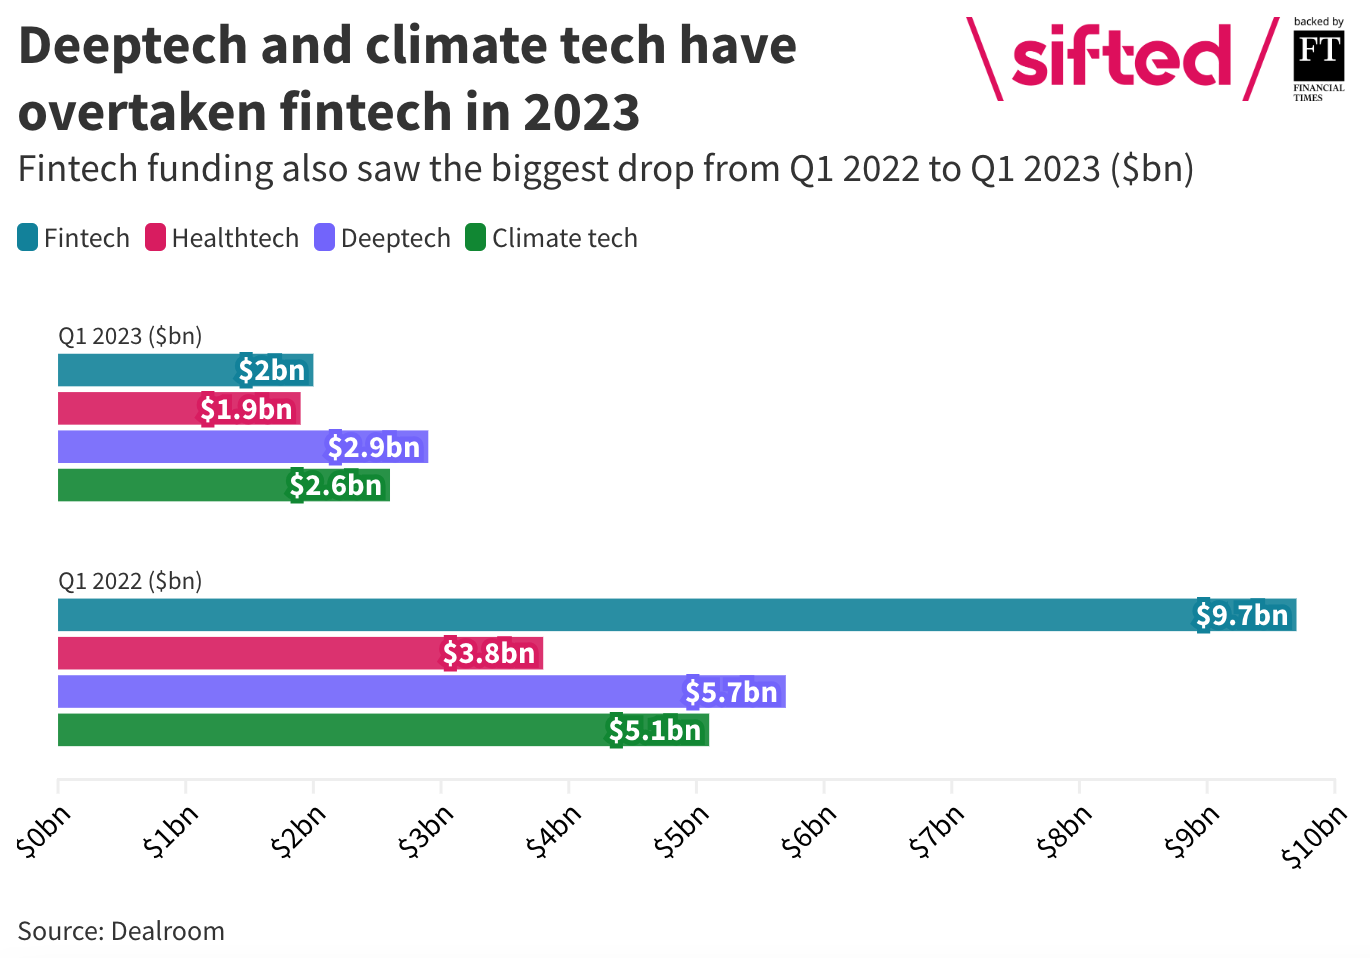 Top tech sectors in Europe by deal volume, Source: Sifted and Dealroom, Apr 2023